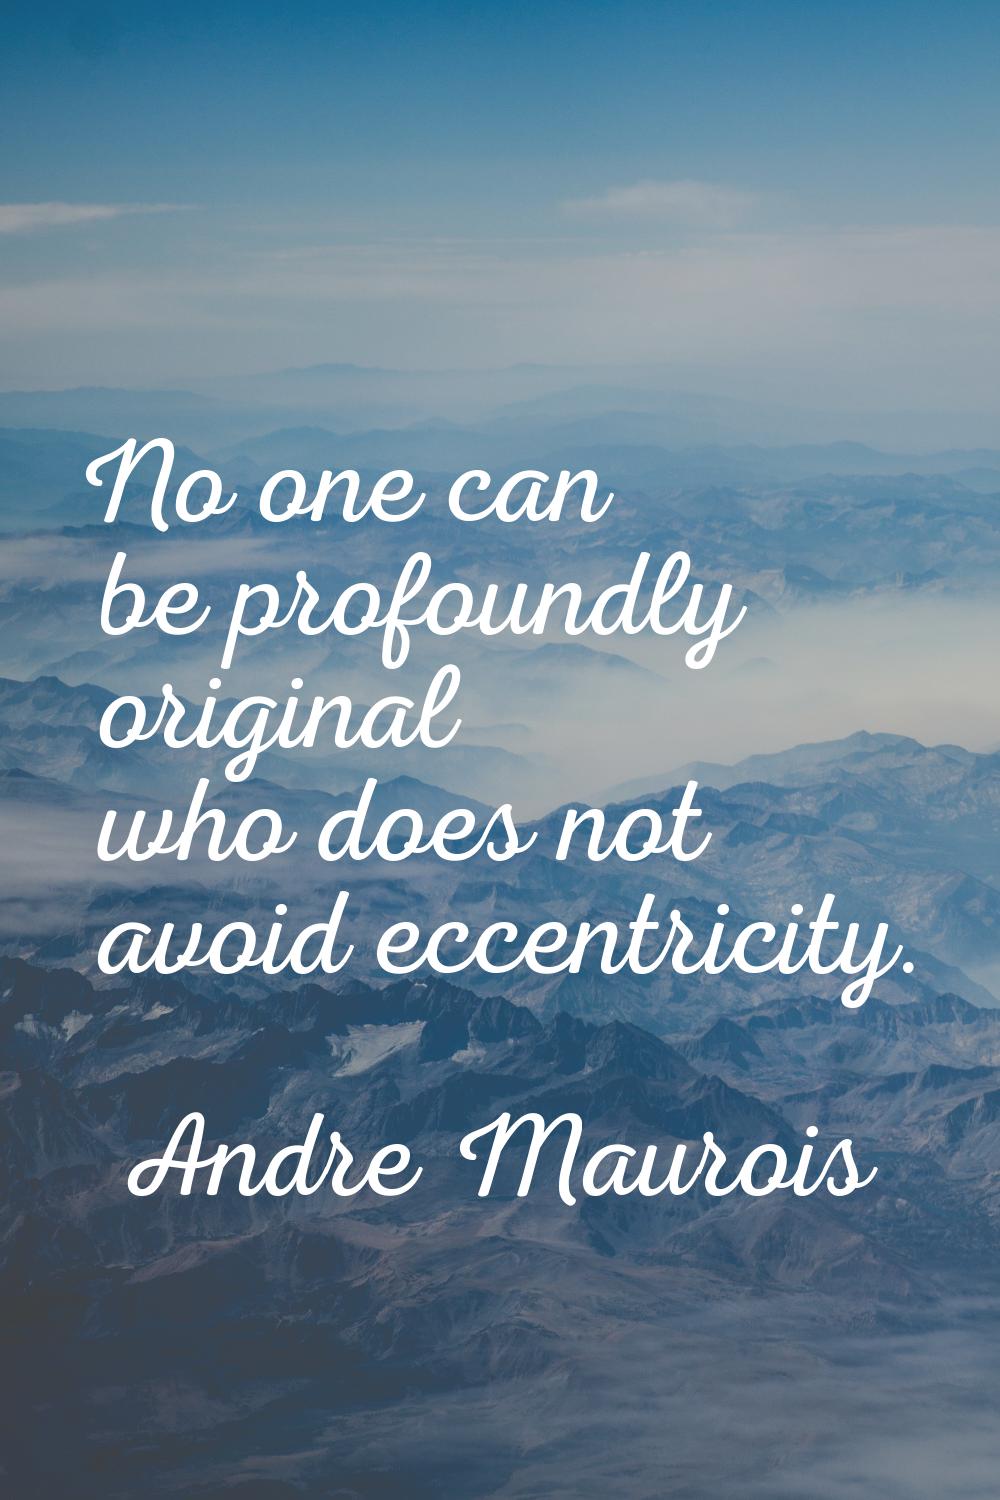 No one can be profoundly original who does not avoid eccentricity.